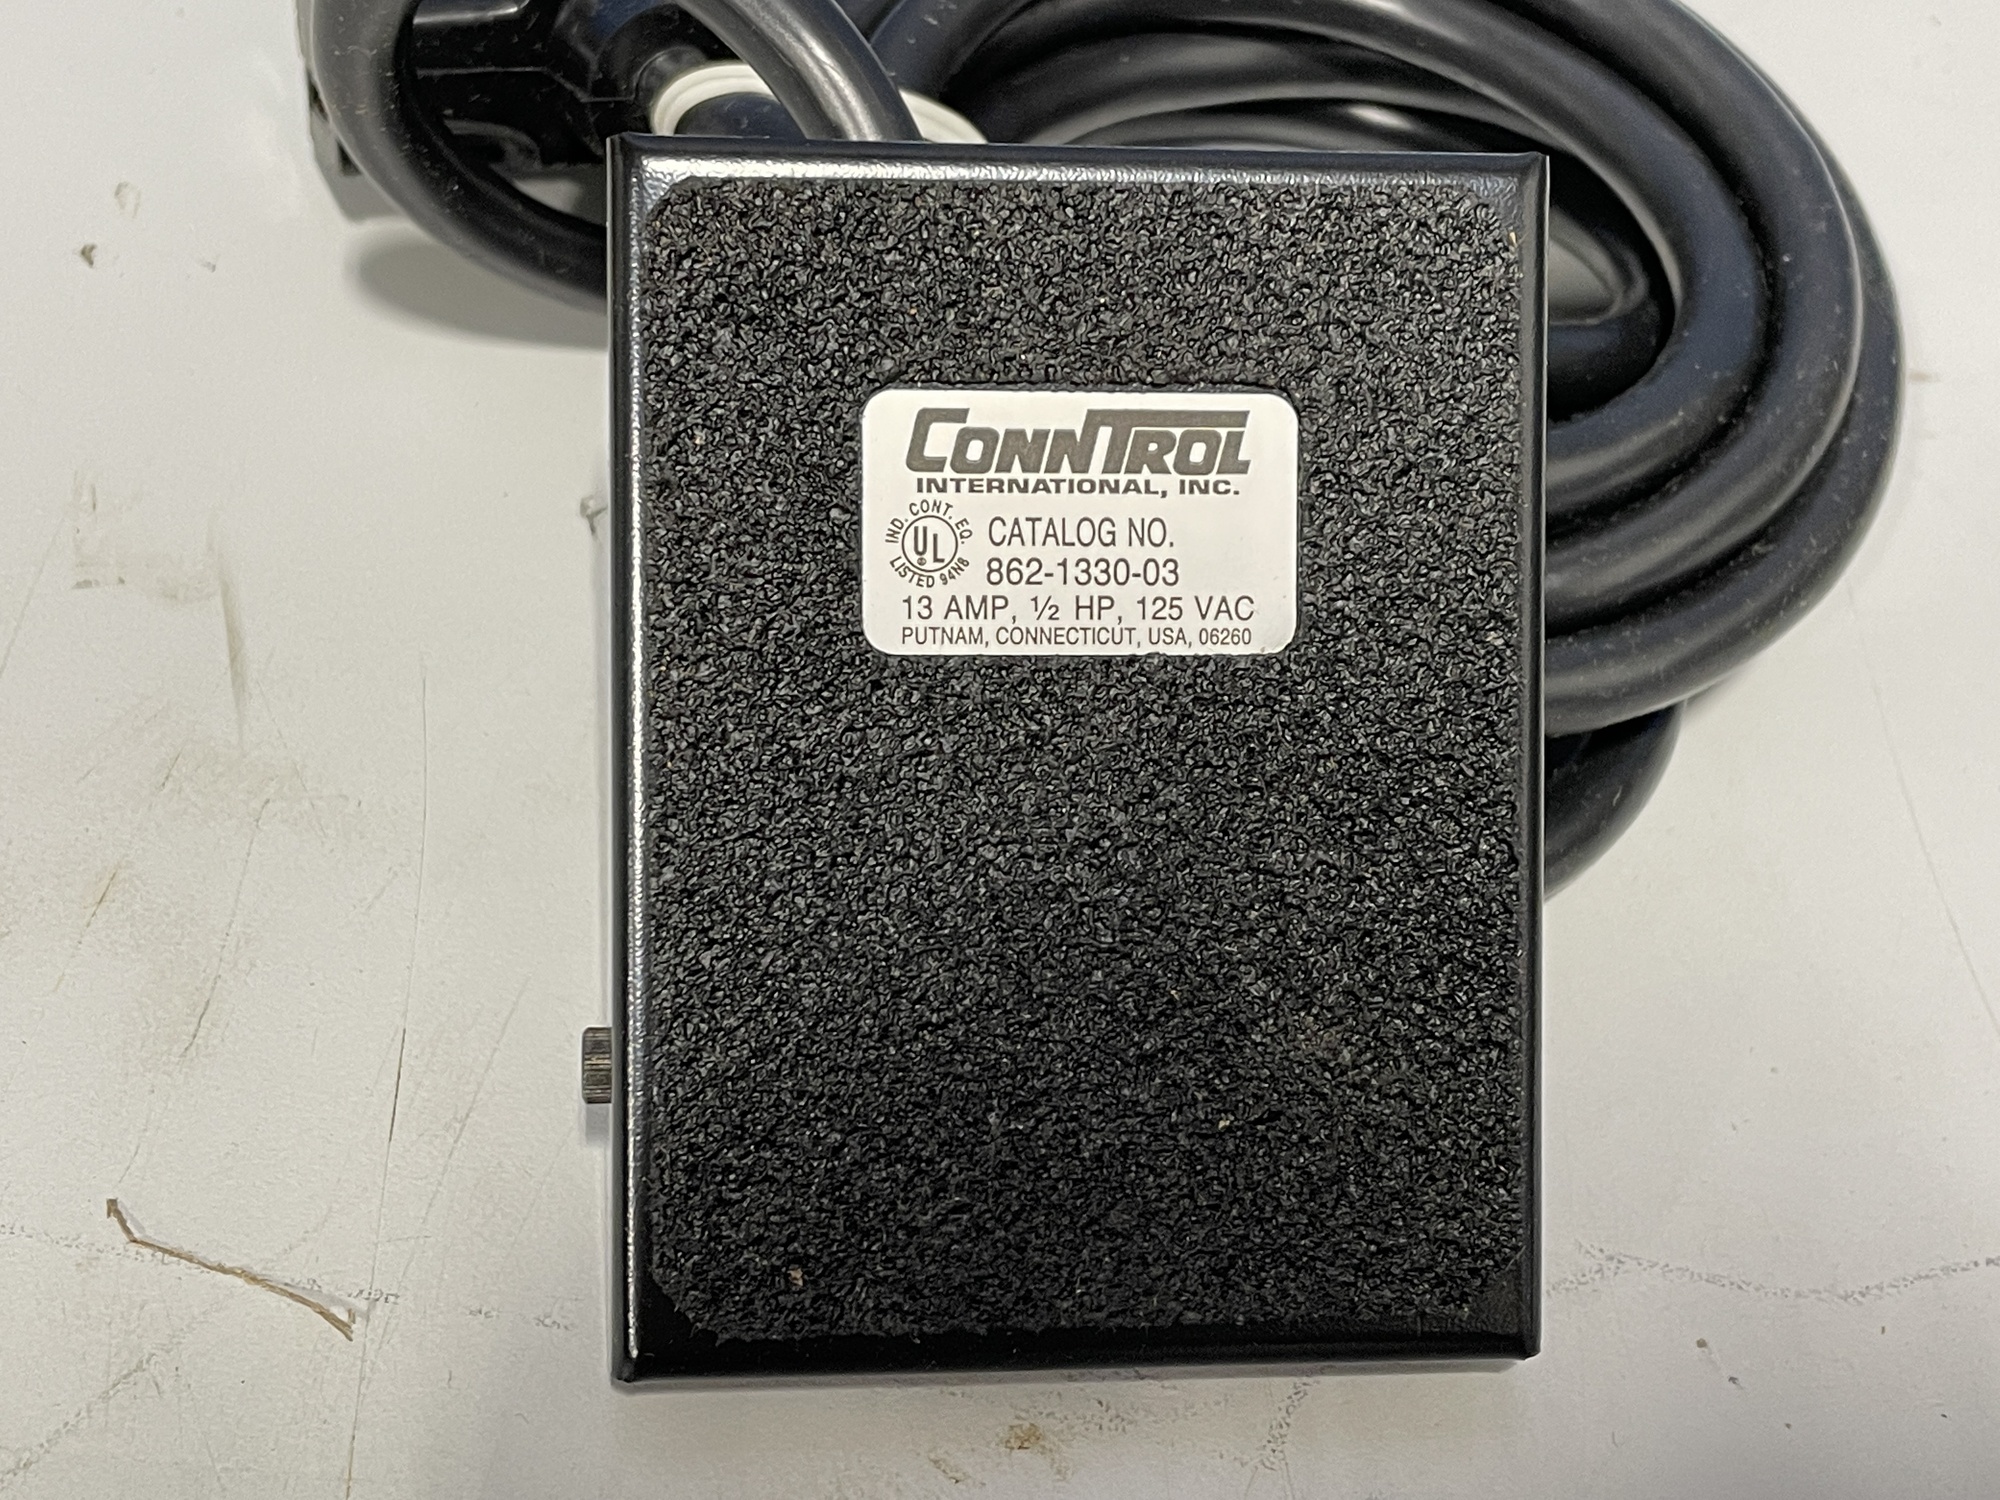 CONNTROL INTERNATIONAL 862-1330-03 Electrical Equipment, Limit Switches | New England Industrial Machinery